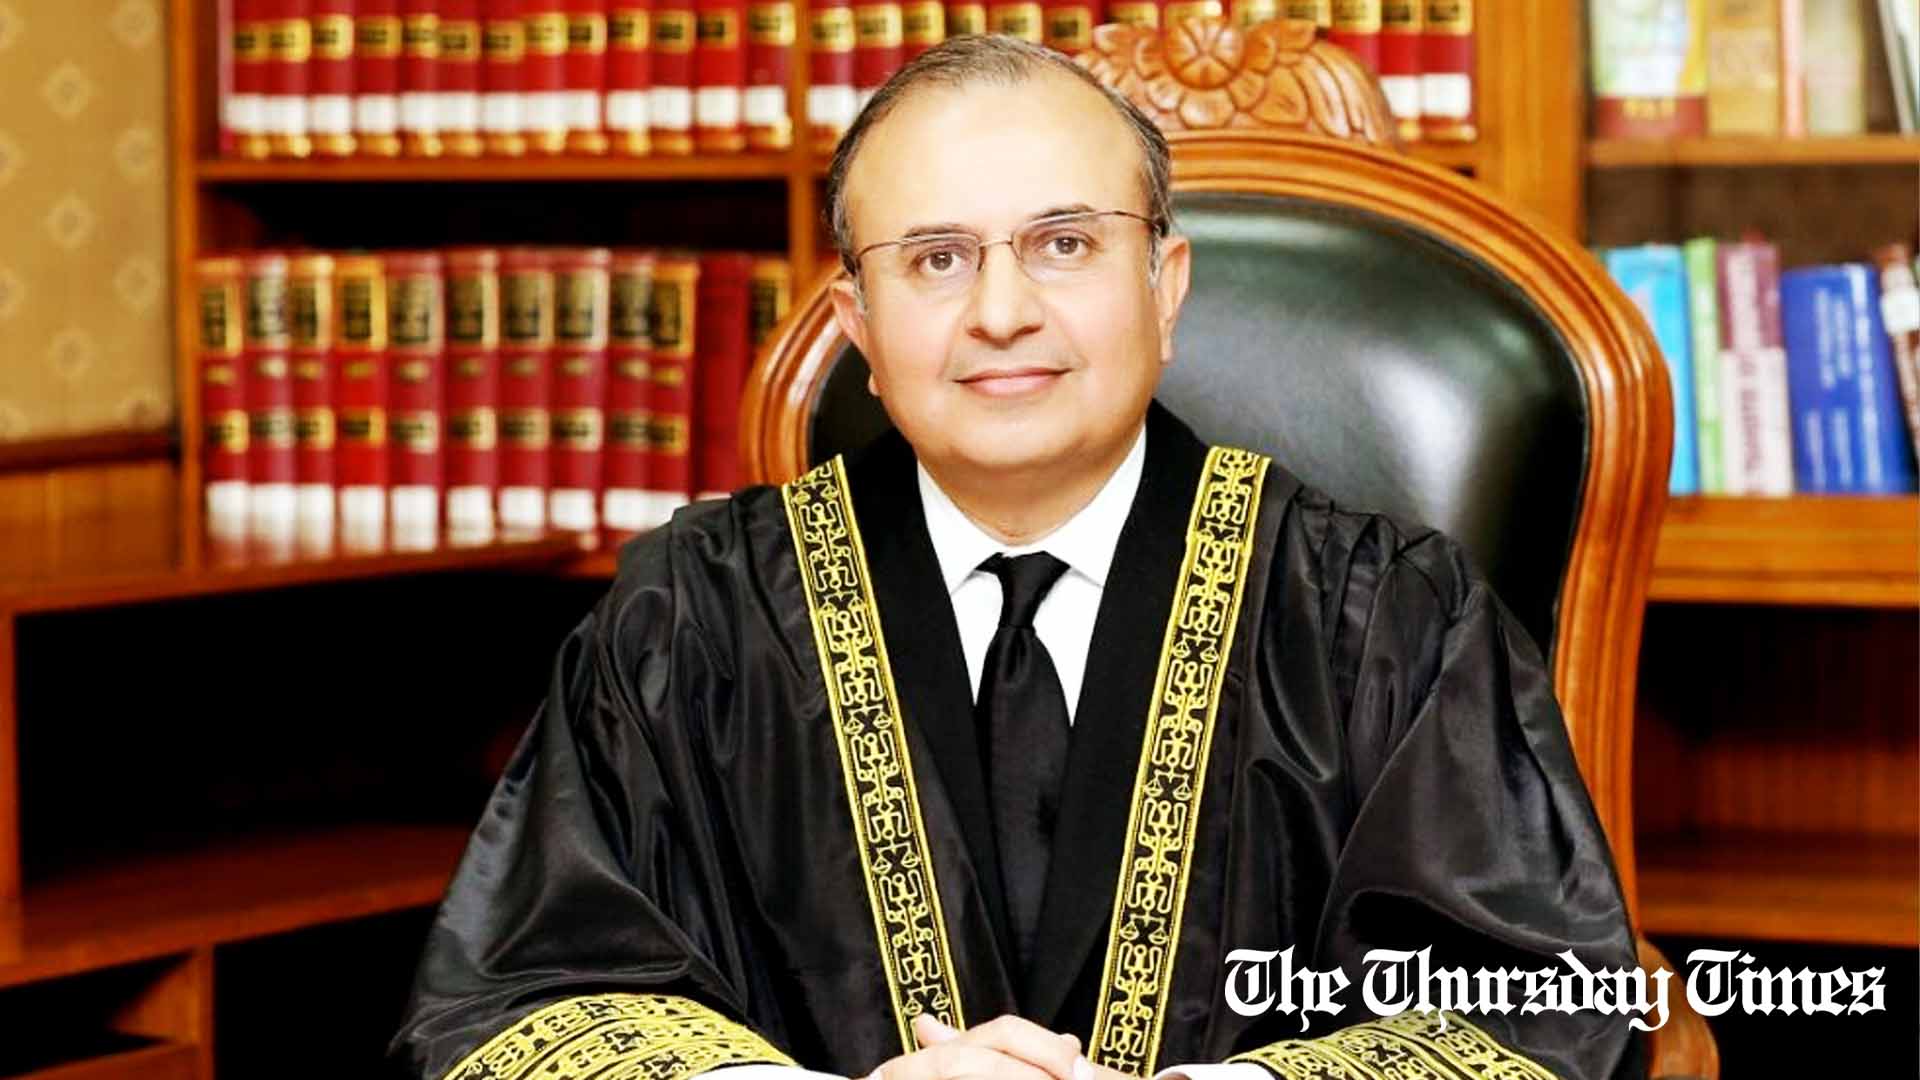 A file photo is shown of Supreme Court of Pakistan judge Justice Mansoor Ali Shah. — FILE/THE THURSDAY TIMES